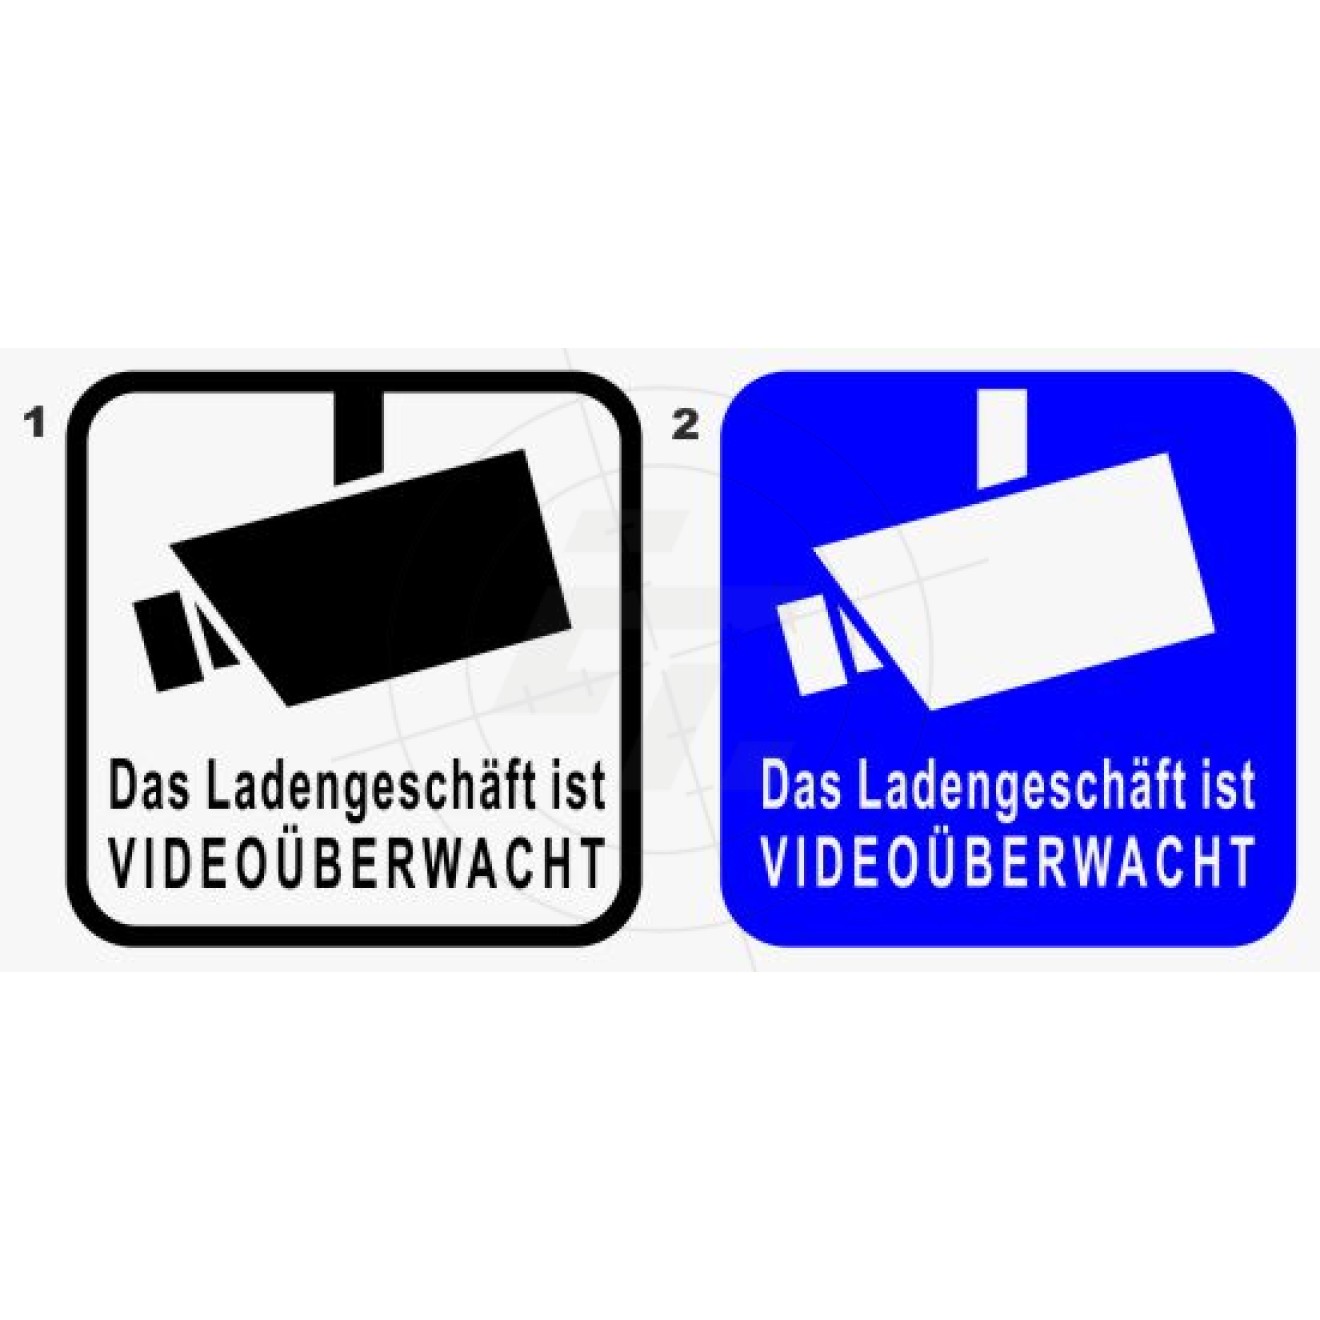 Video surveillance with text message